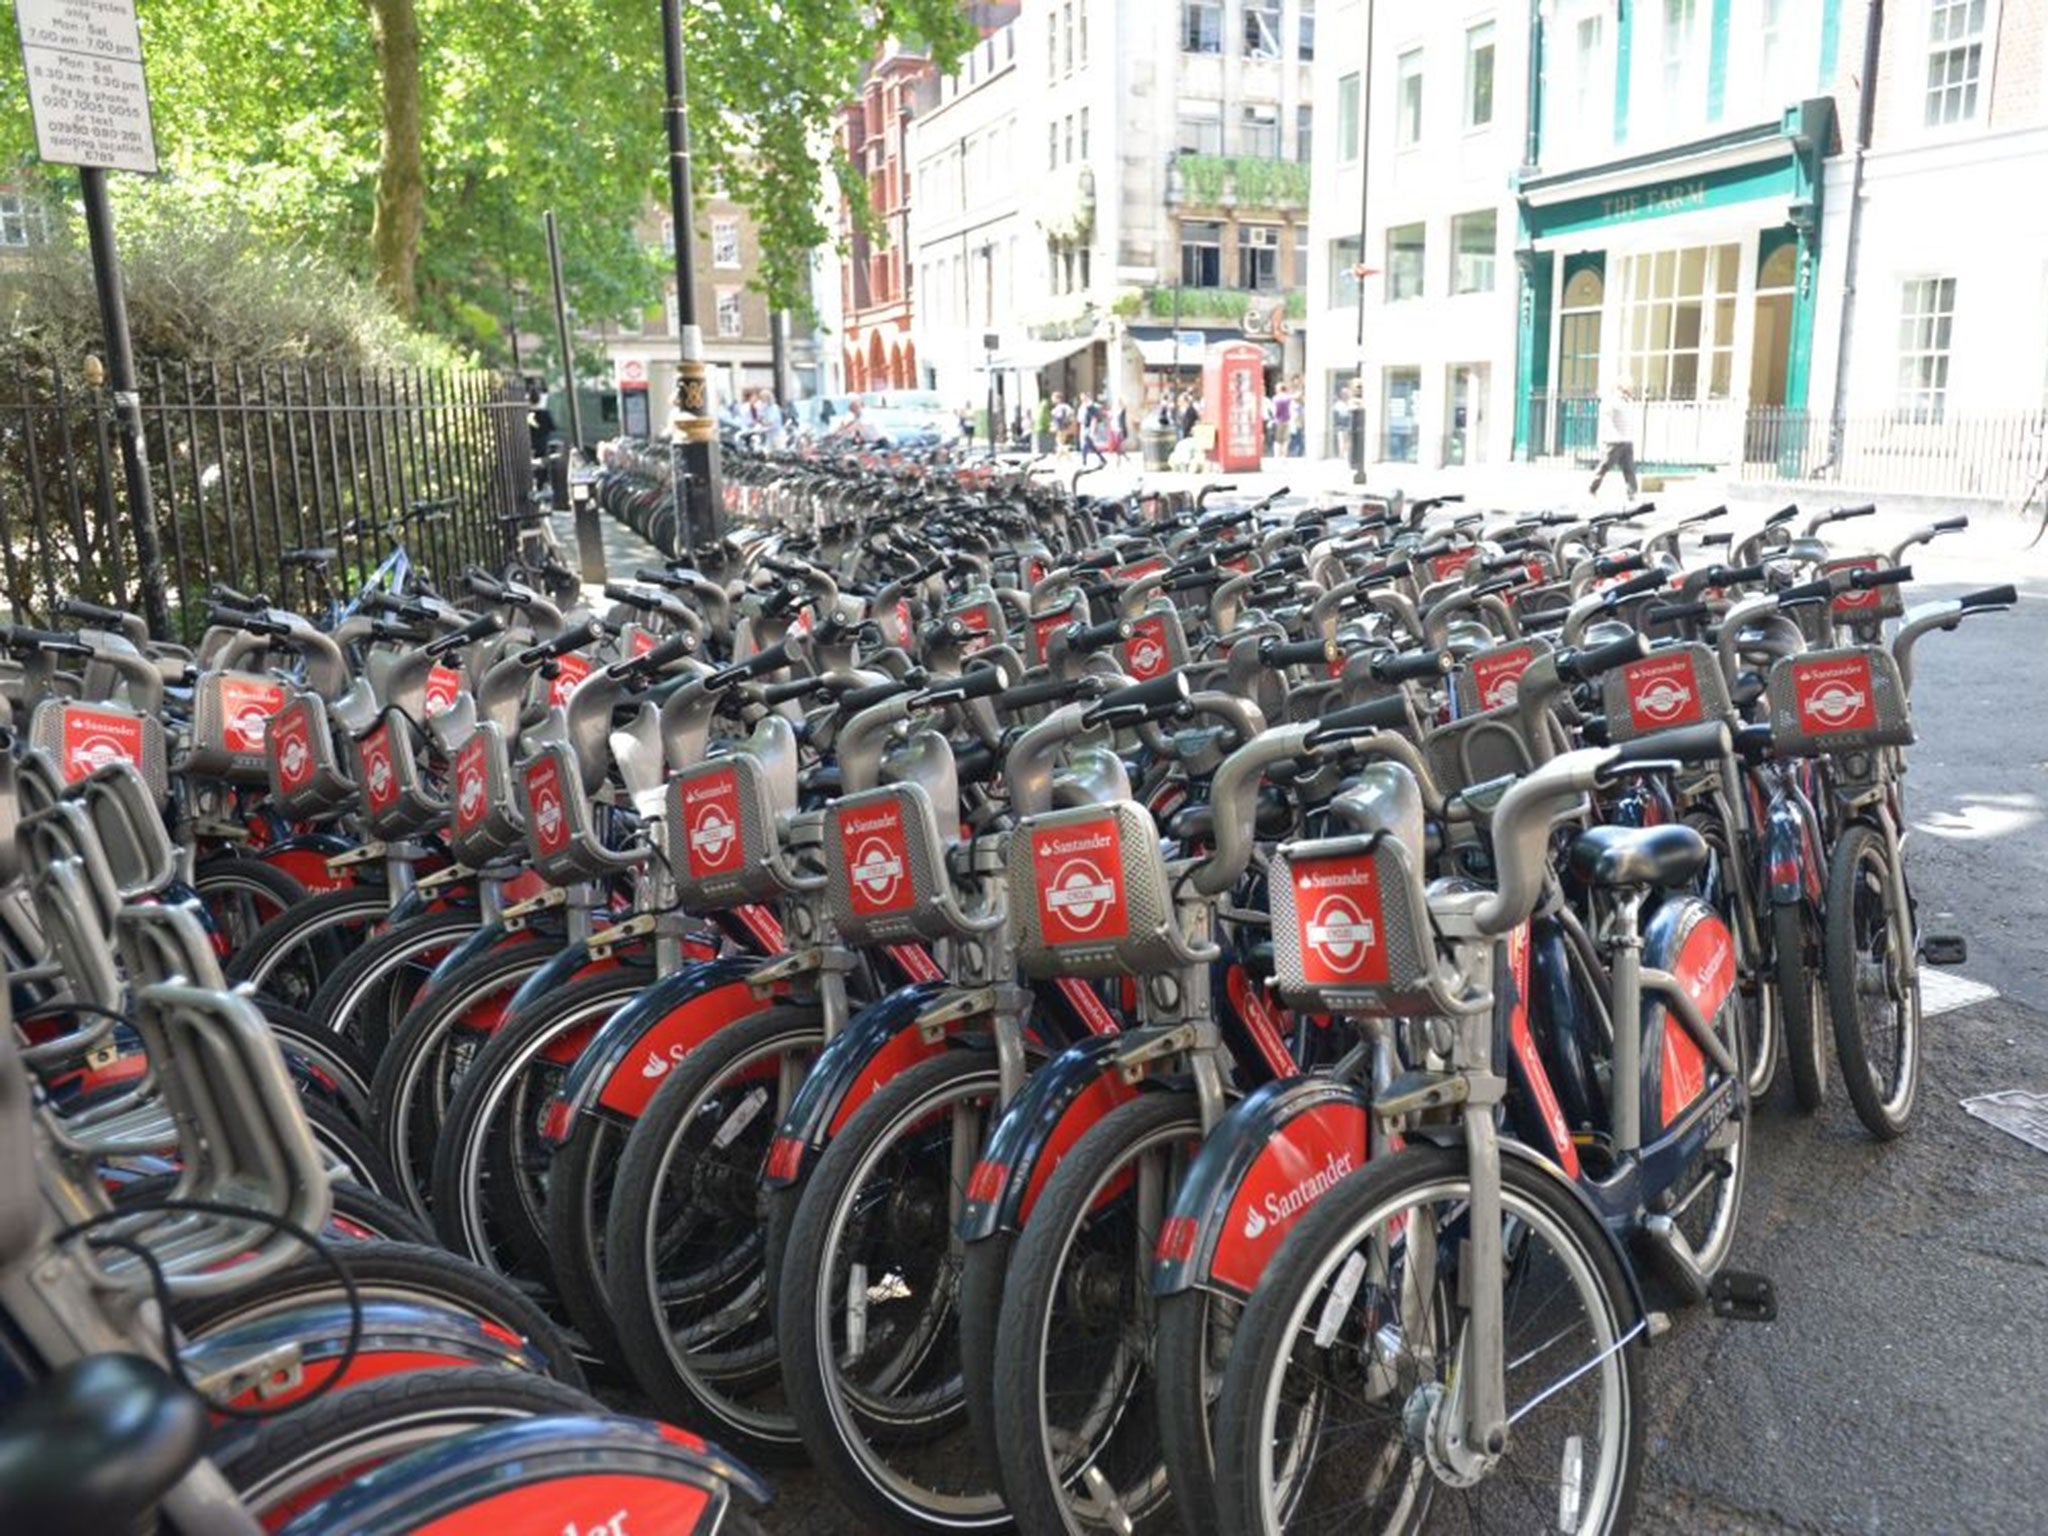 Hundreds of Boris Bikes have been abandoned in central London, they have been collected in Soho Square to be dispersed